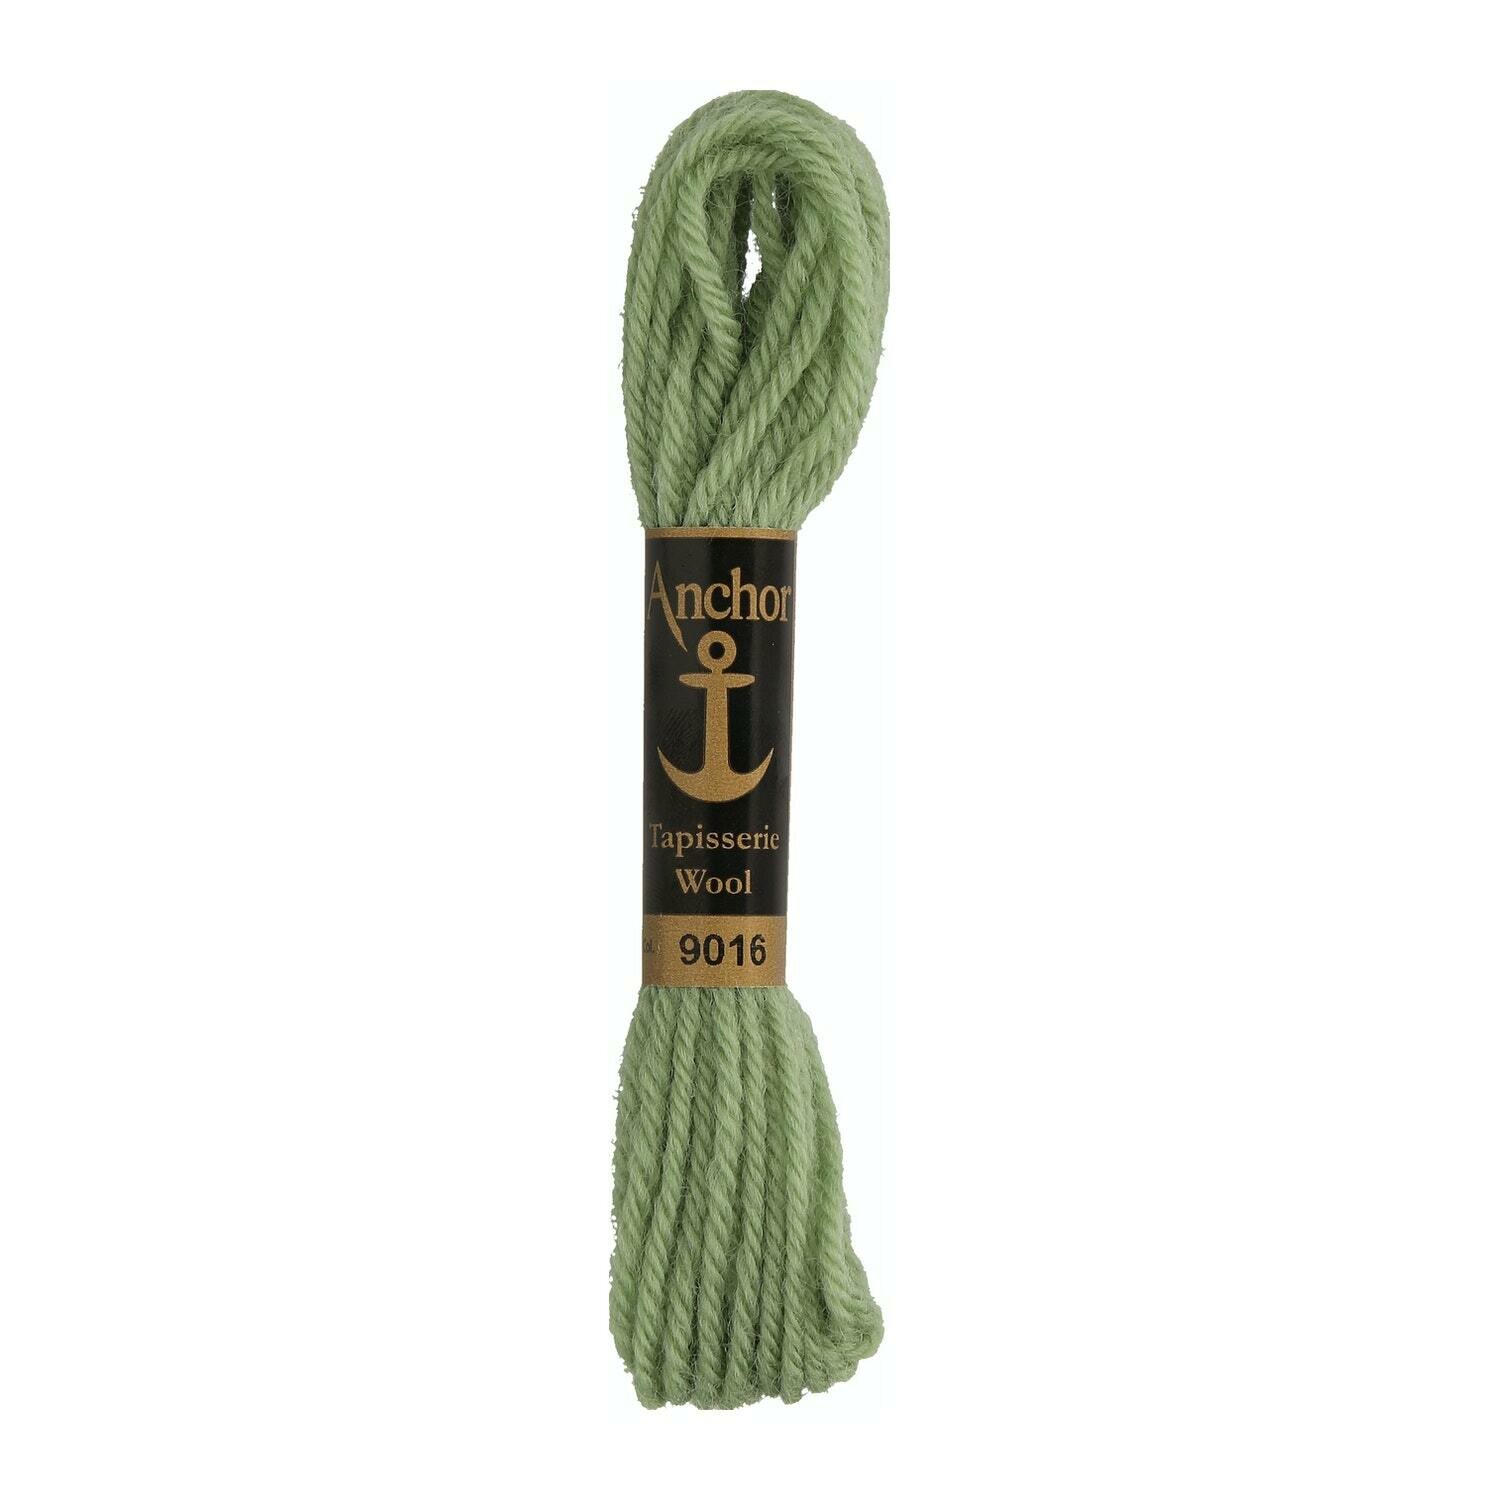 Anchor Tapisserie Wool # 09016